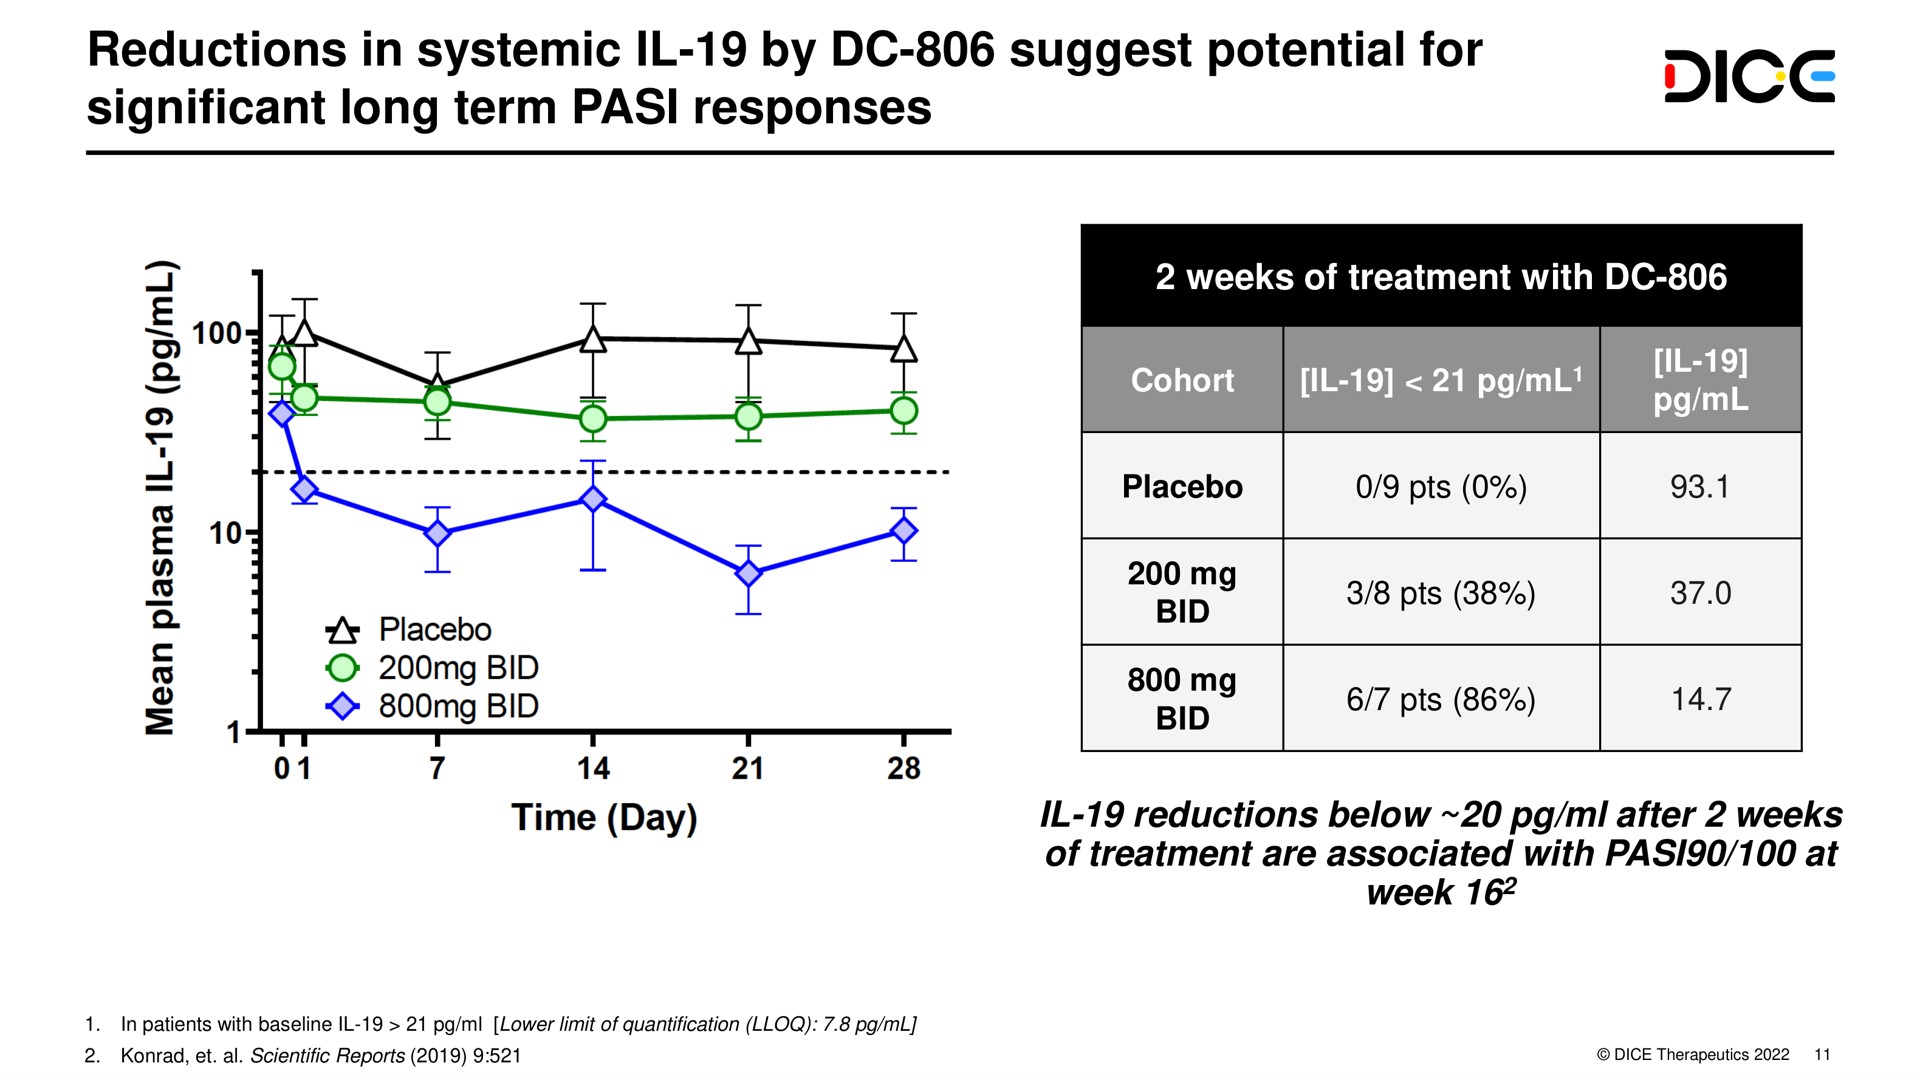 reductions in systemic by suggest potential for significant long term pasi responses bid | DICE Therapeutics